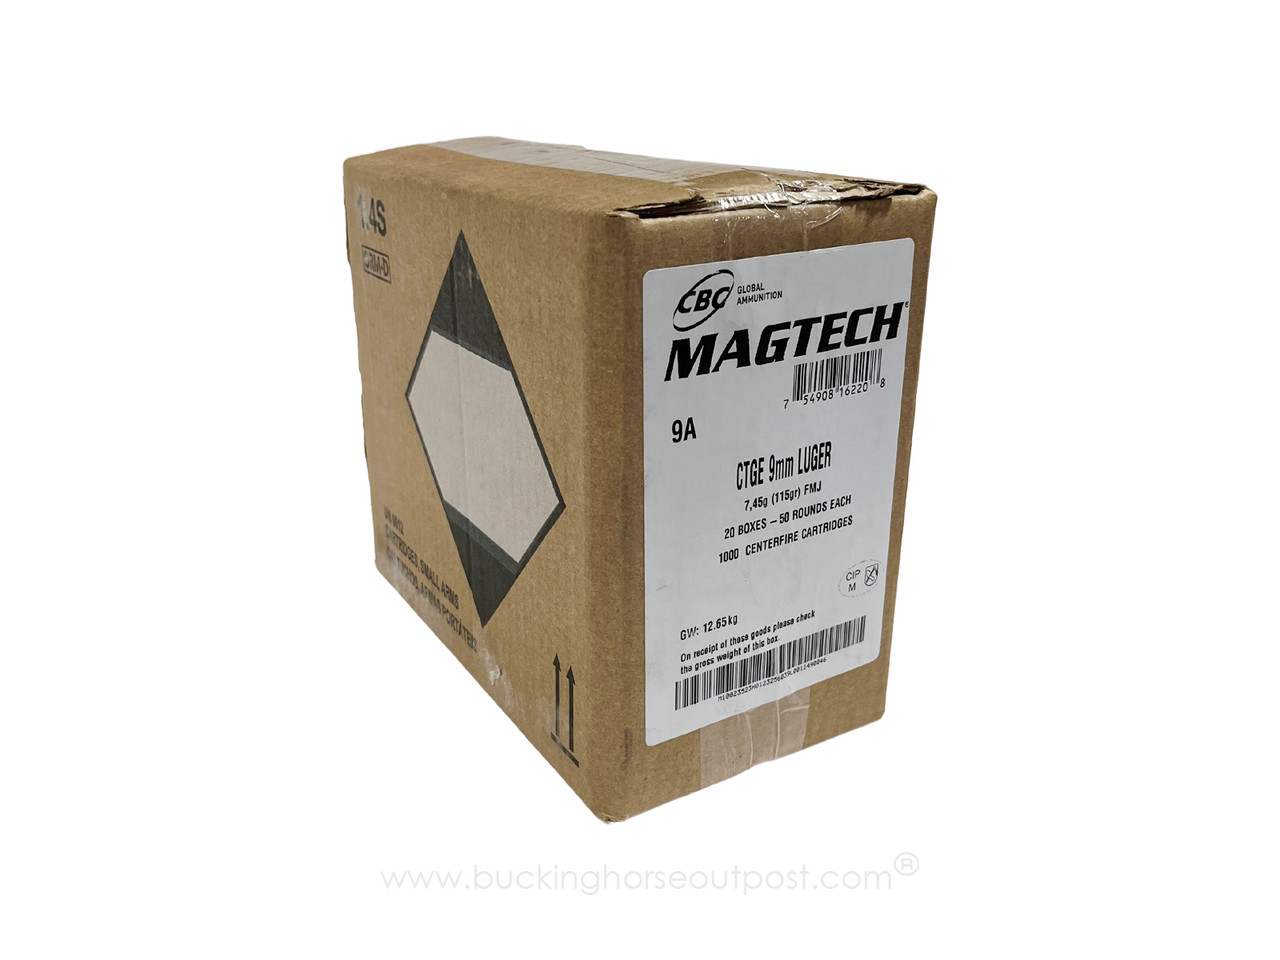 Magtech 9mm Luger 115 Grain Full Metal Jacket 1000rds Per Case (9A) - FREE SHIPPING ON ORDERS OVER $175